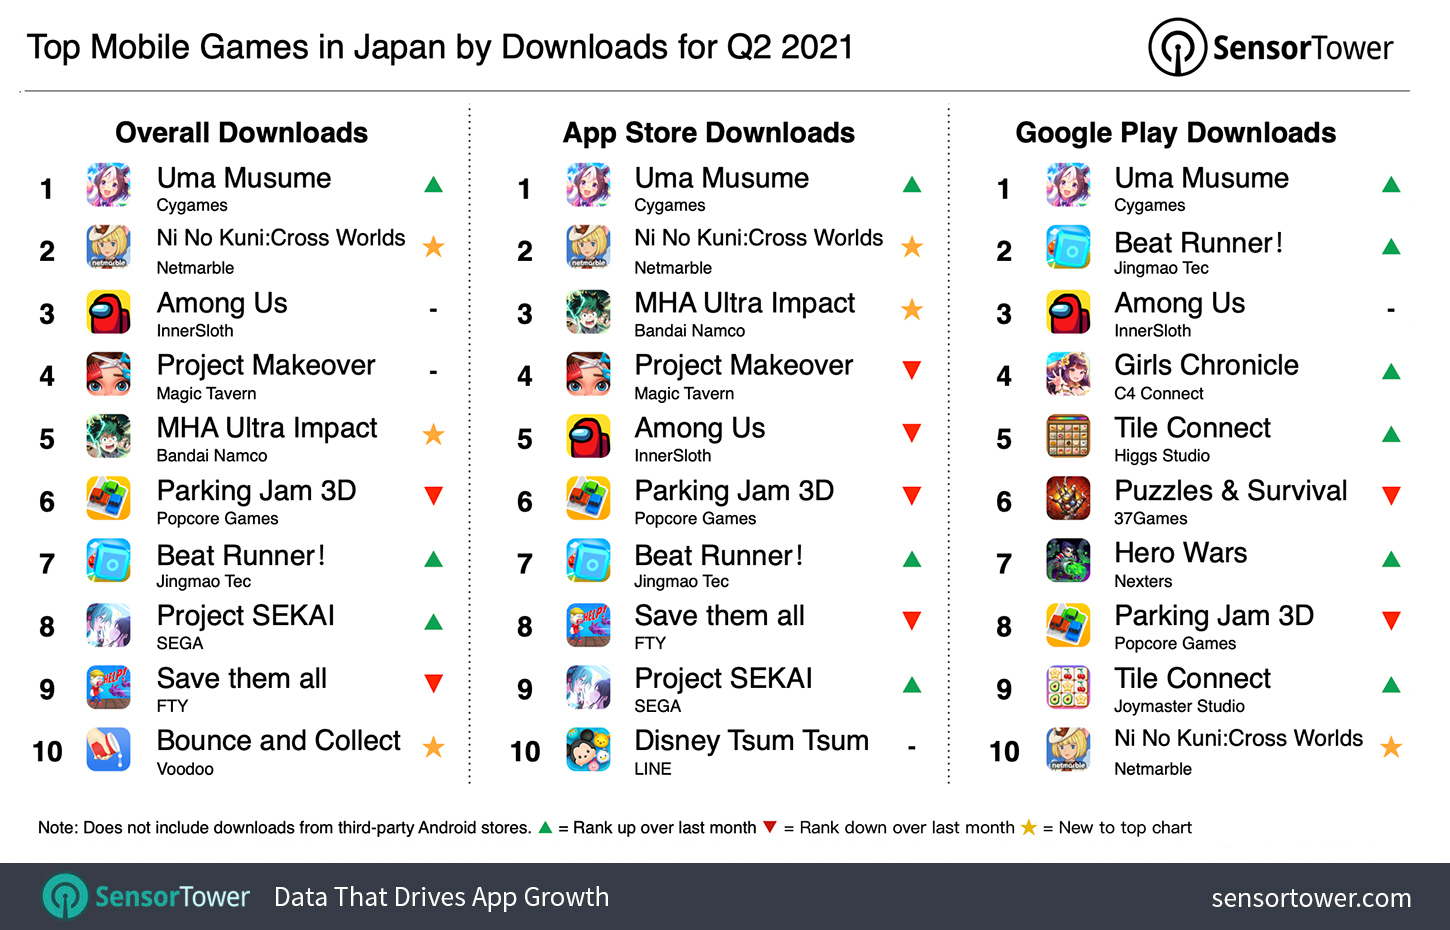 Top Mobile Games in Japan for Q2 2021 by Downloads